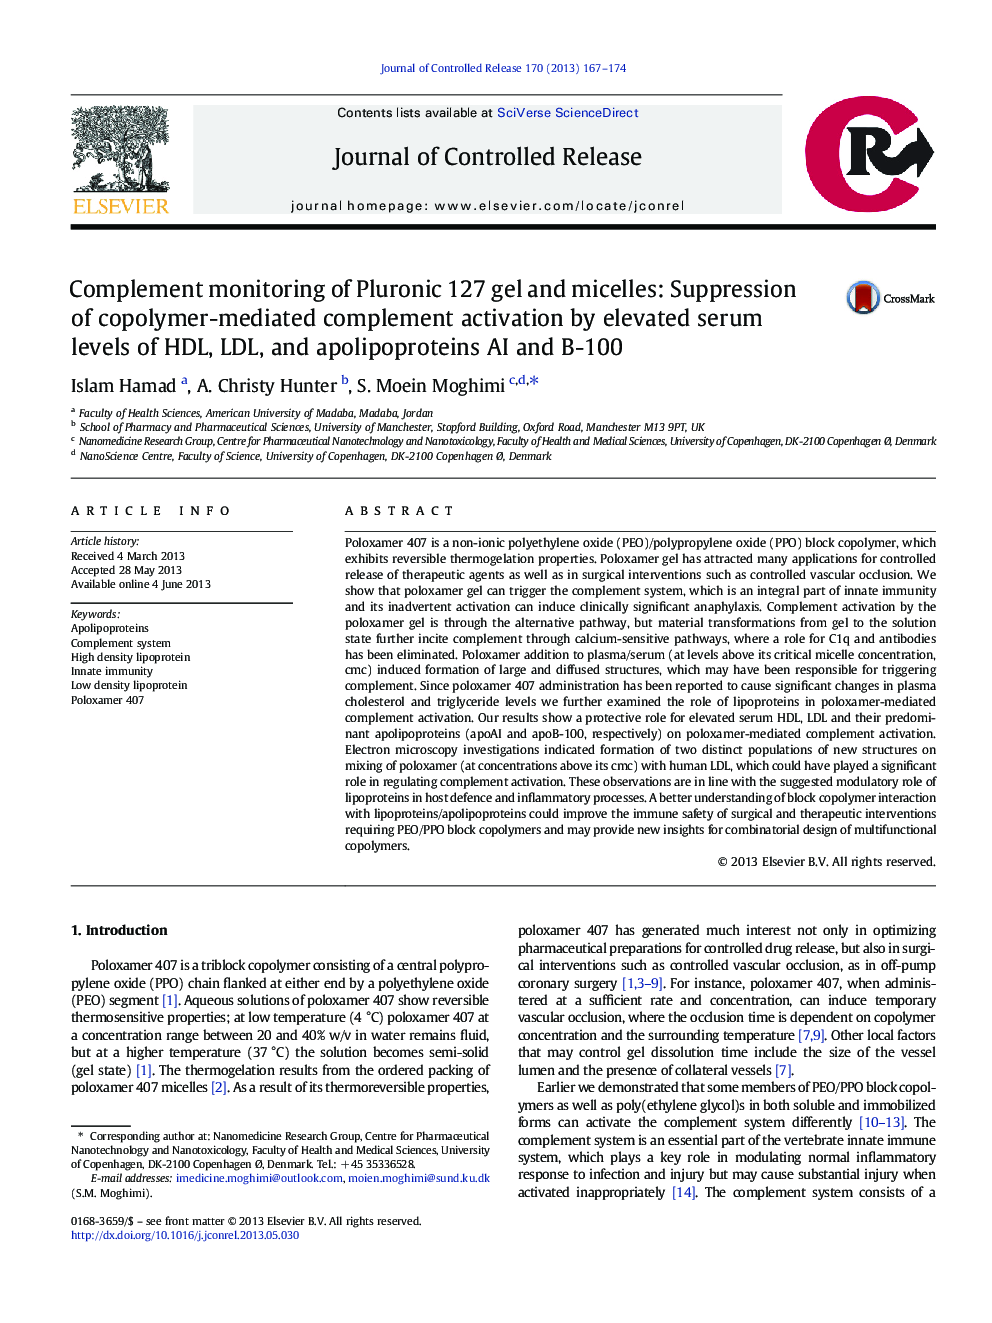 Complement monitoring of Pluronic 127 gel and micelles: Suppression of copolymer-mediated complement activation by elevated serum levels of HDL, LDL, and apolipoproteins AI and B-100